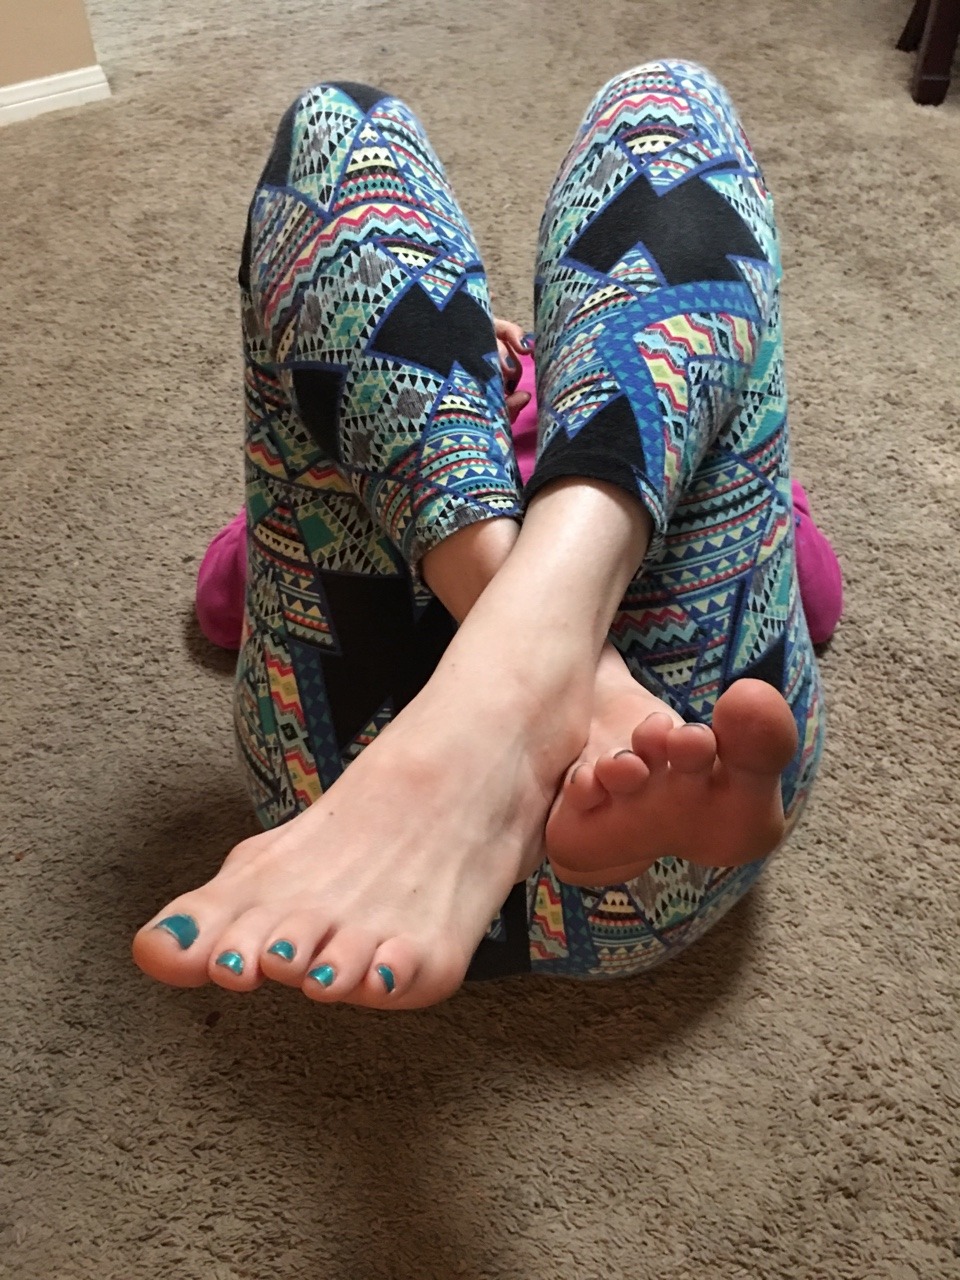 opentolife37:  Just got home from yoga, hubby is quick to help me take my sweaty